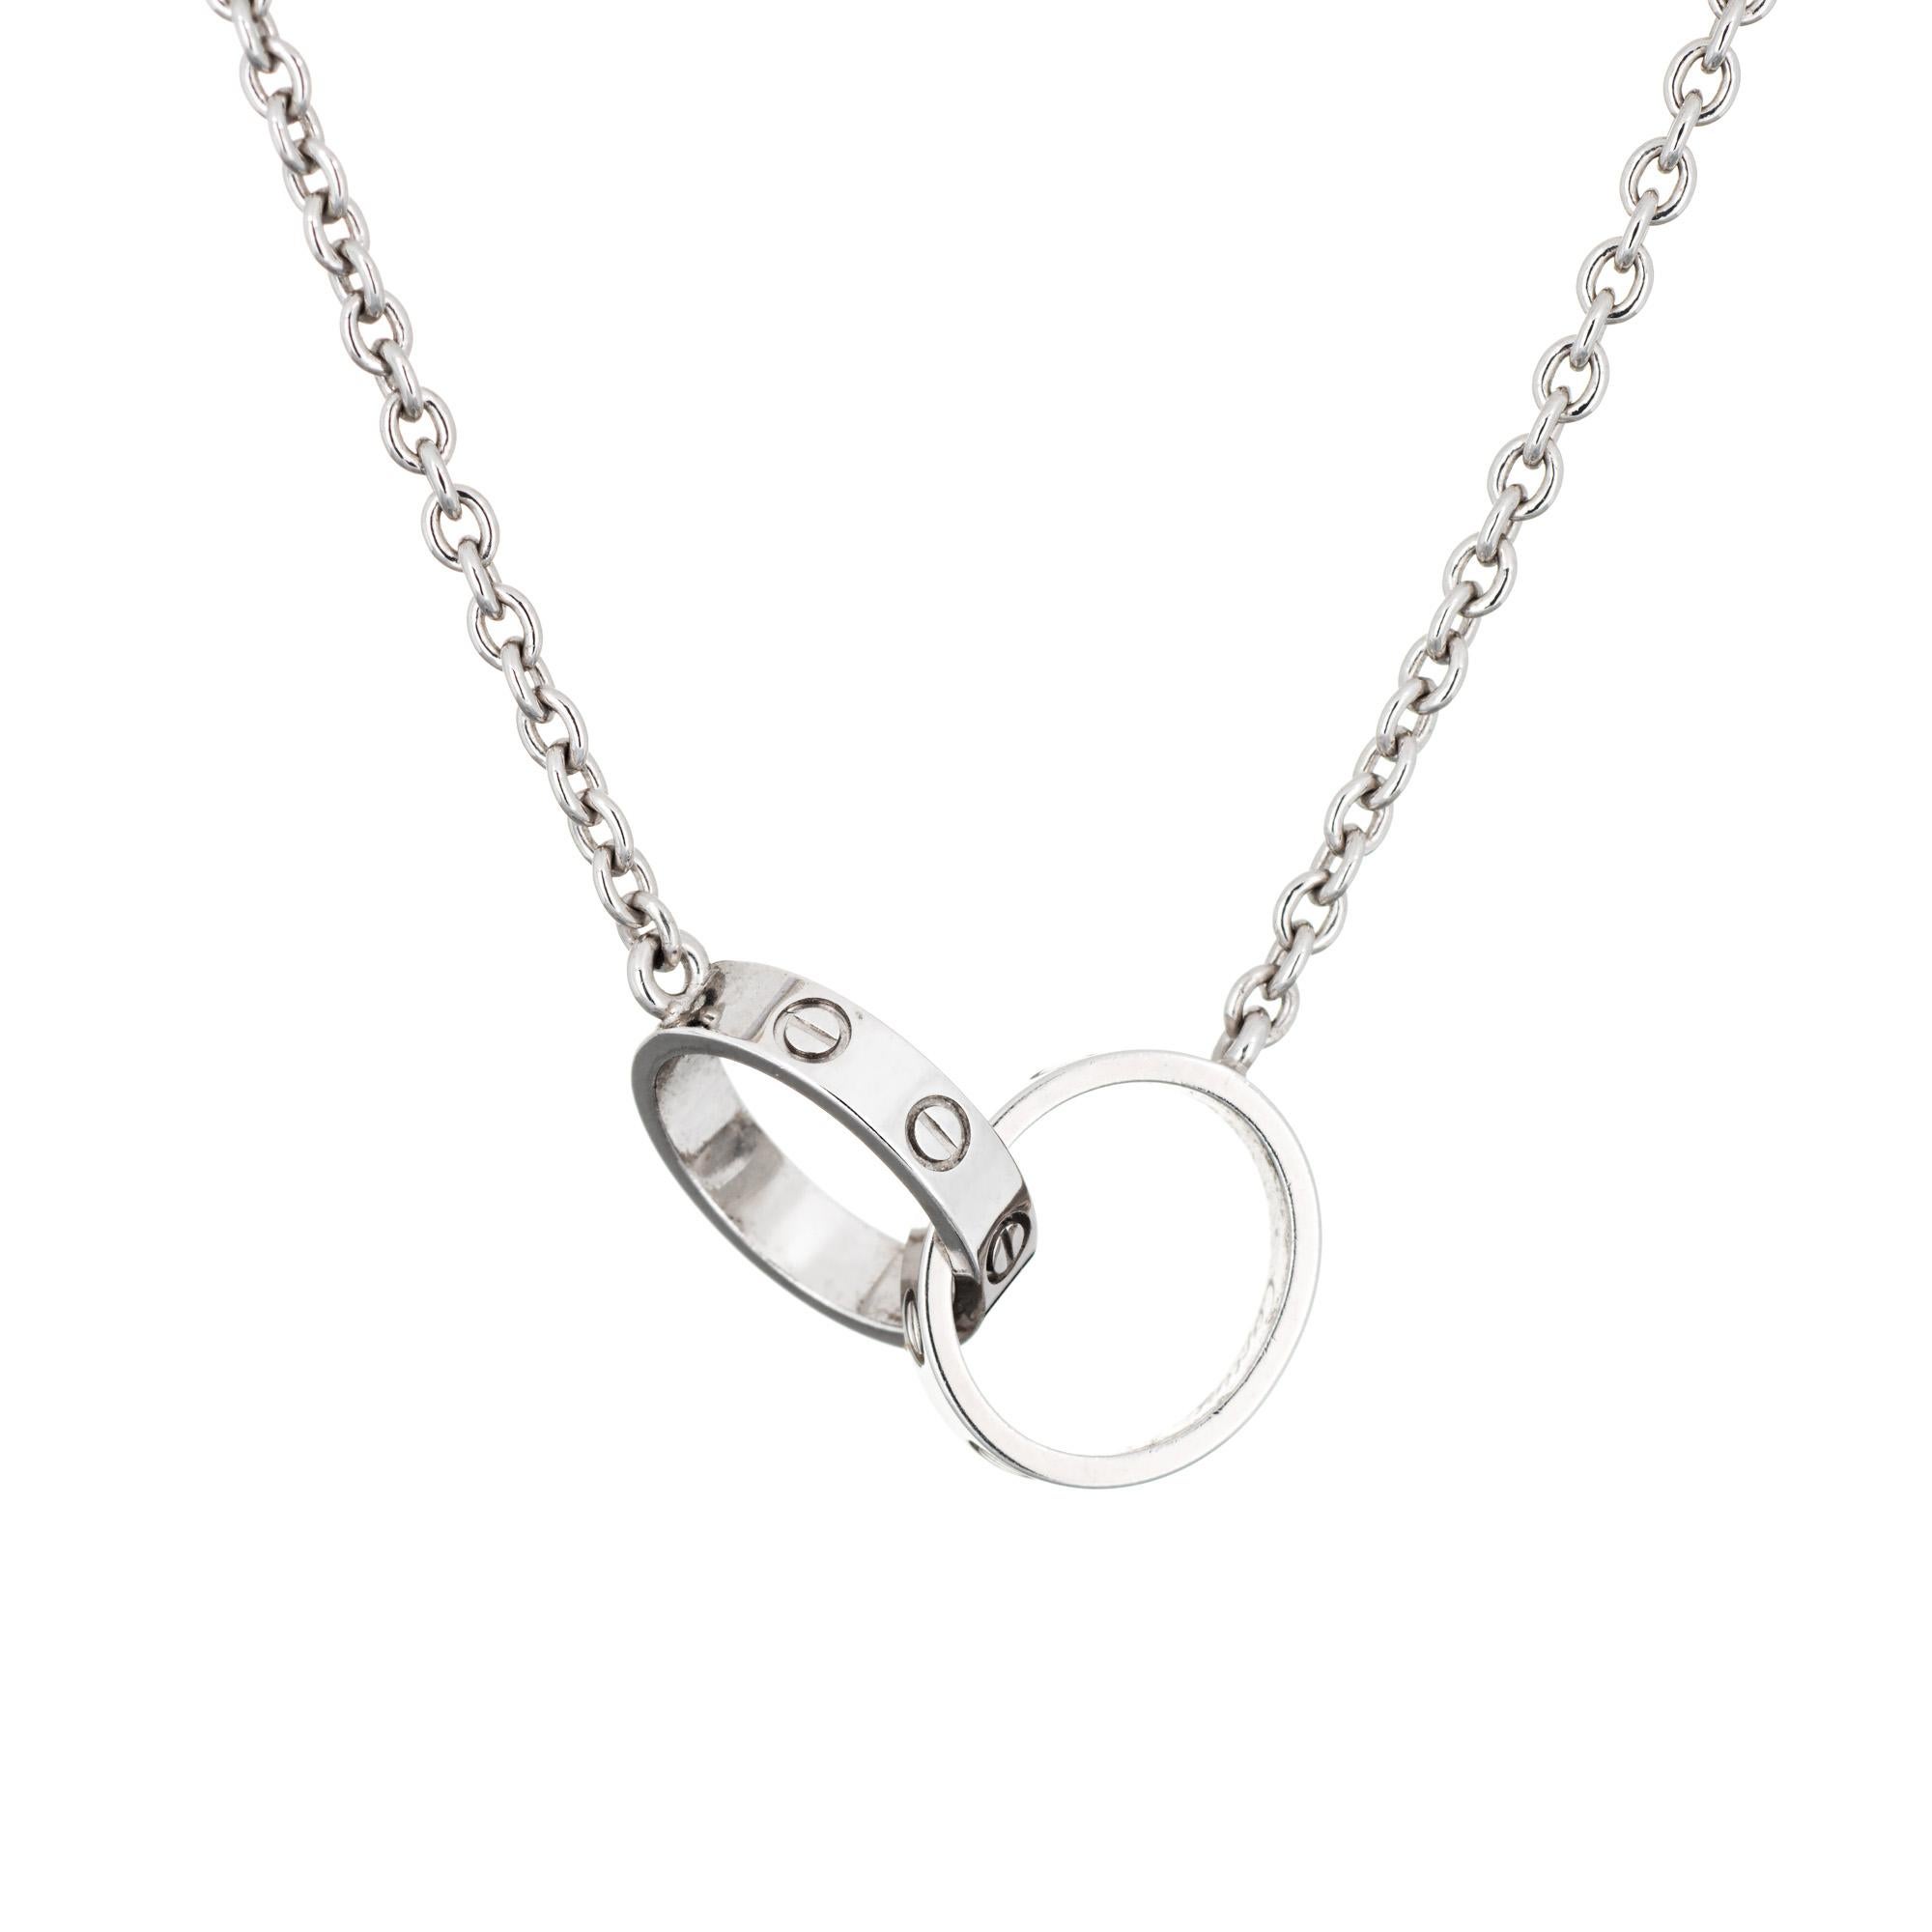 Pre-owned Cartier Double Love necklace crafted in 18k white gold.  

The Cartier necklace features two interlocking love links. The necklace is great worn alone or layered with your fine jewelry from any era. The necklace comes with a Cartier